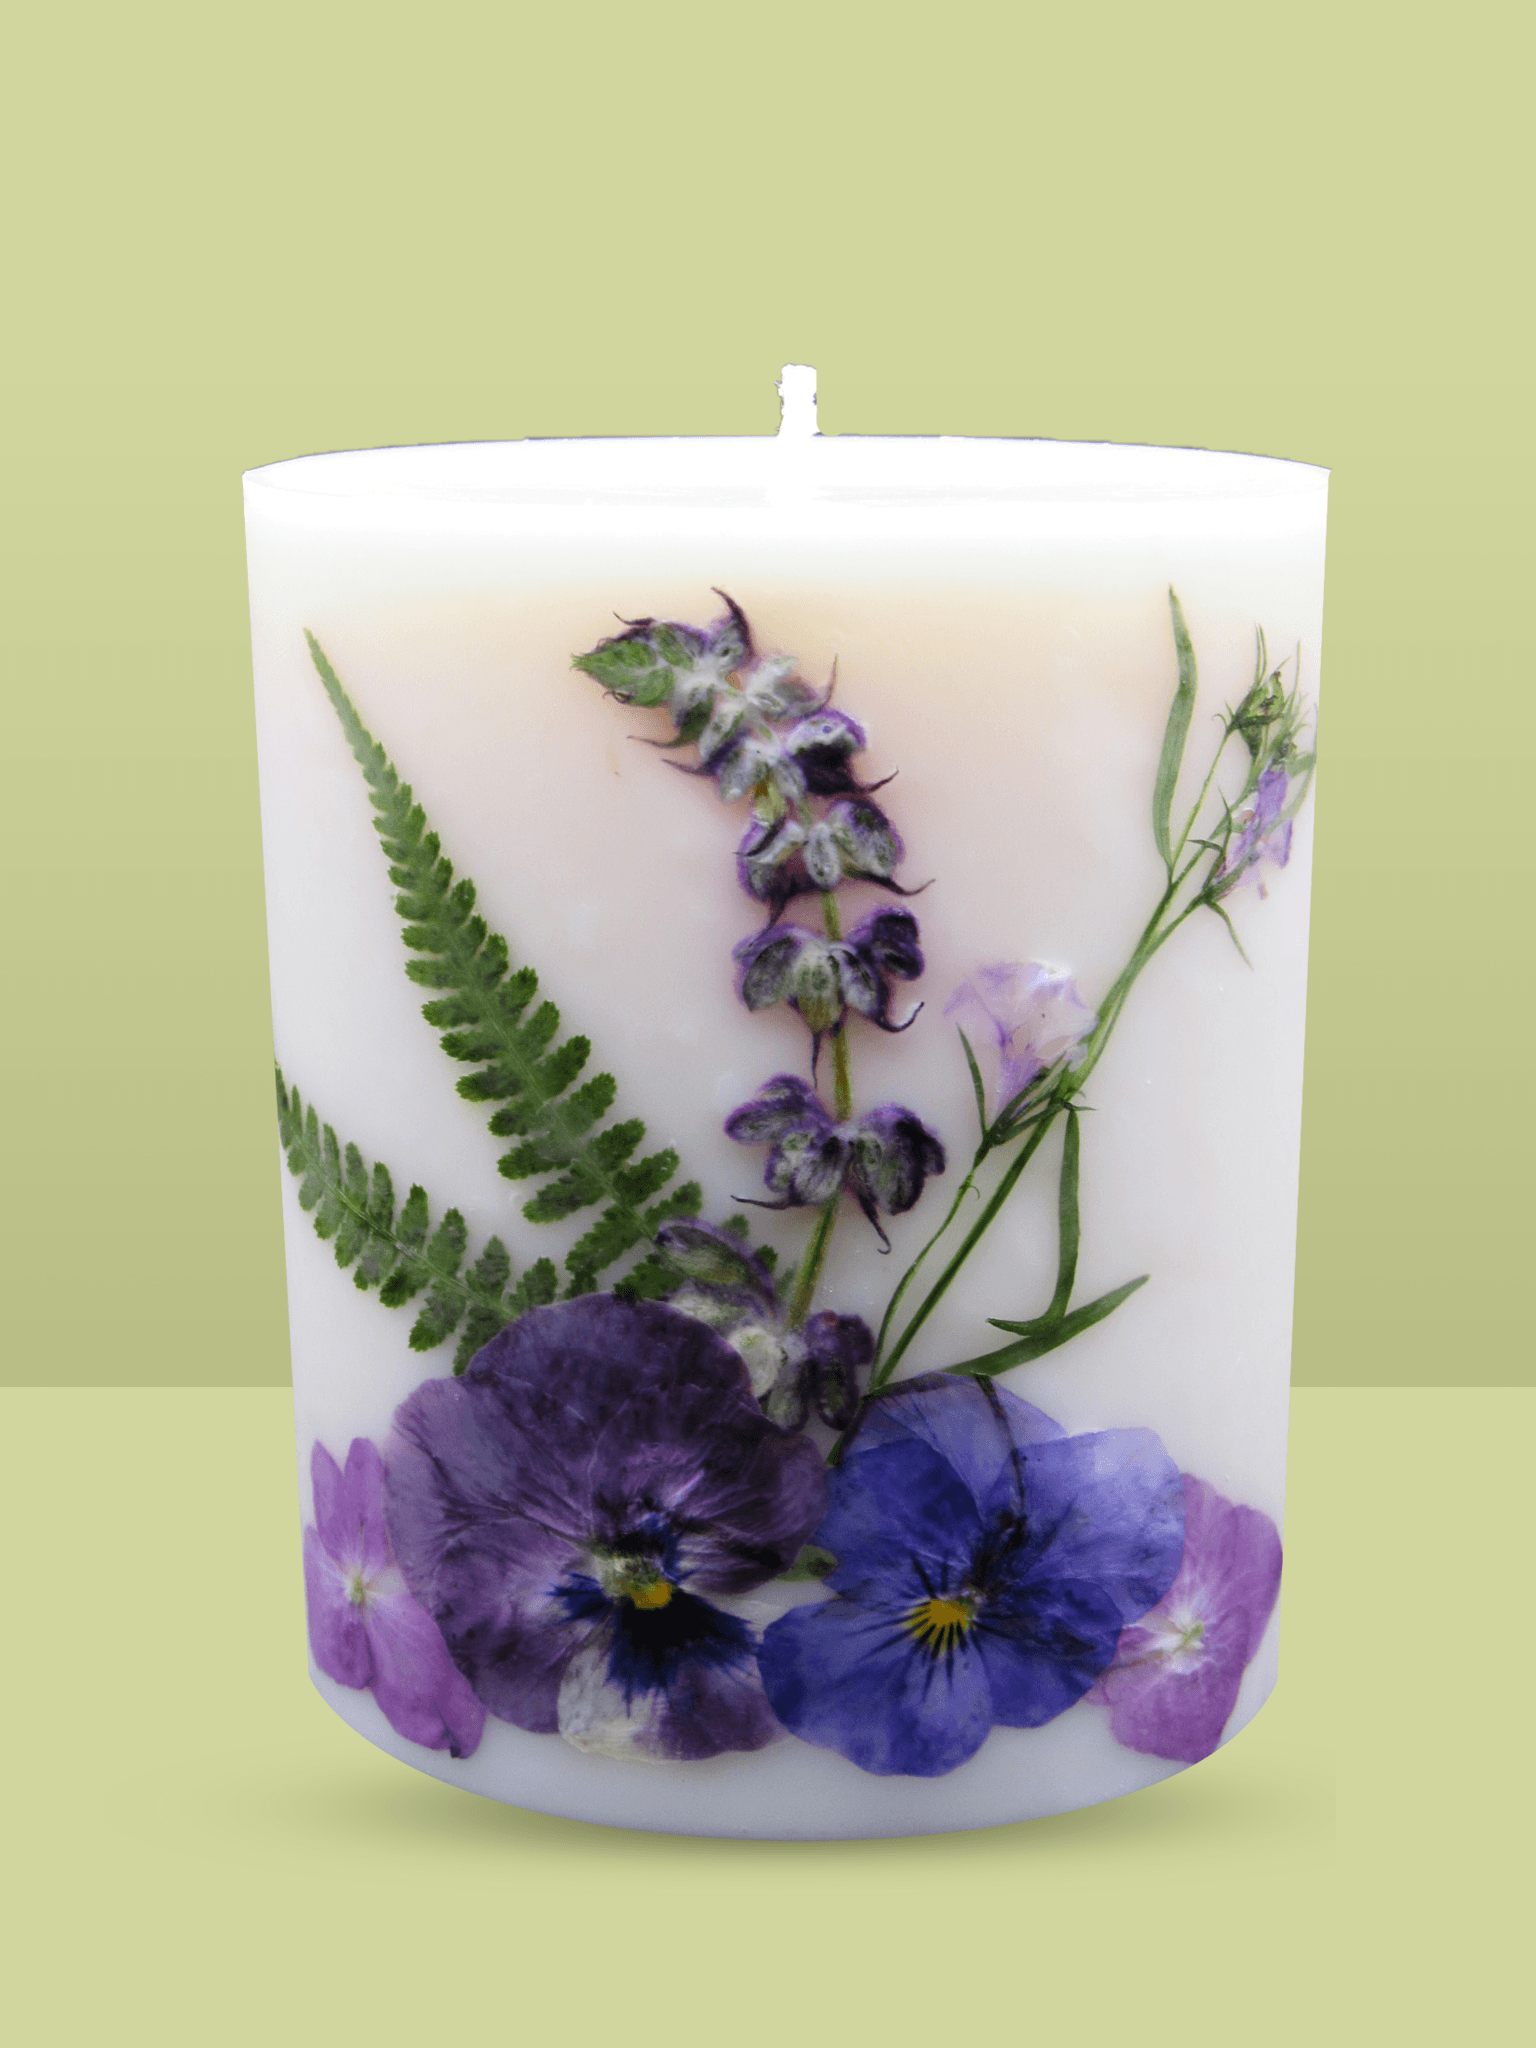 Before Edison Emergency Candle – Guinevere's Candles